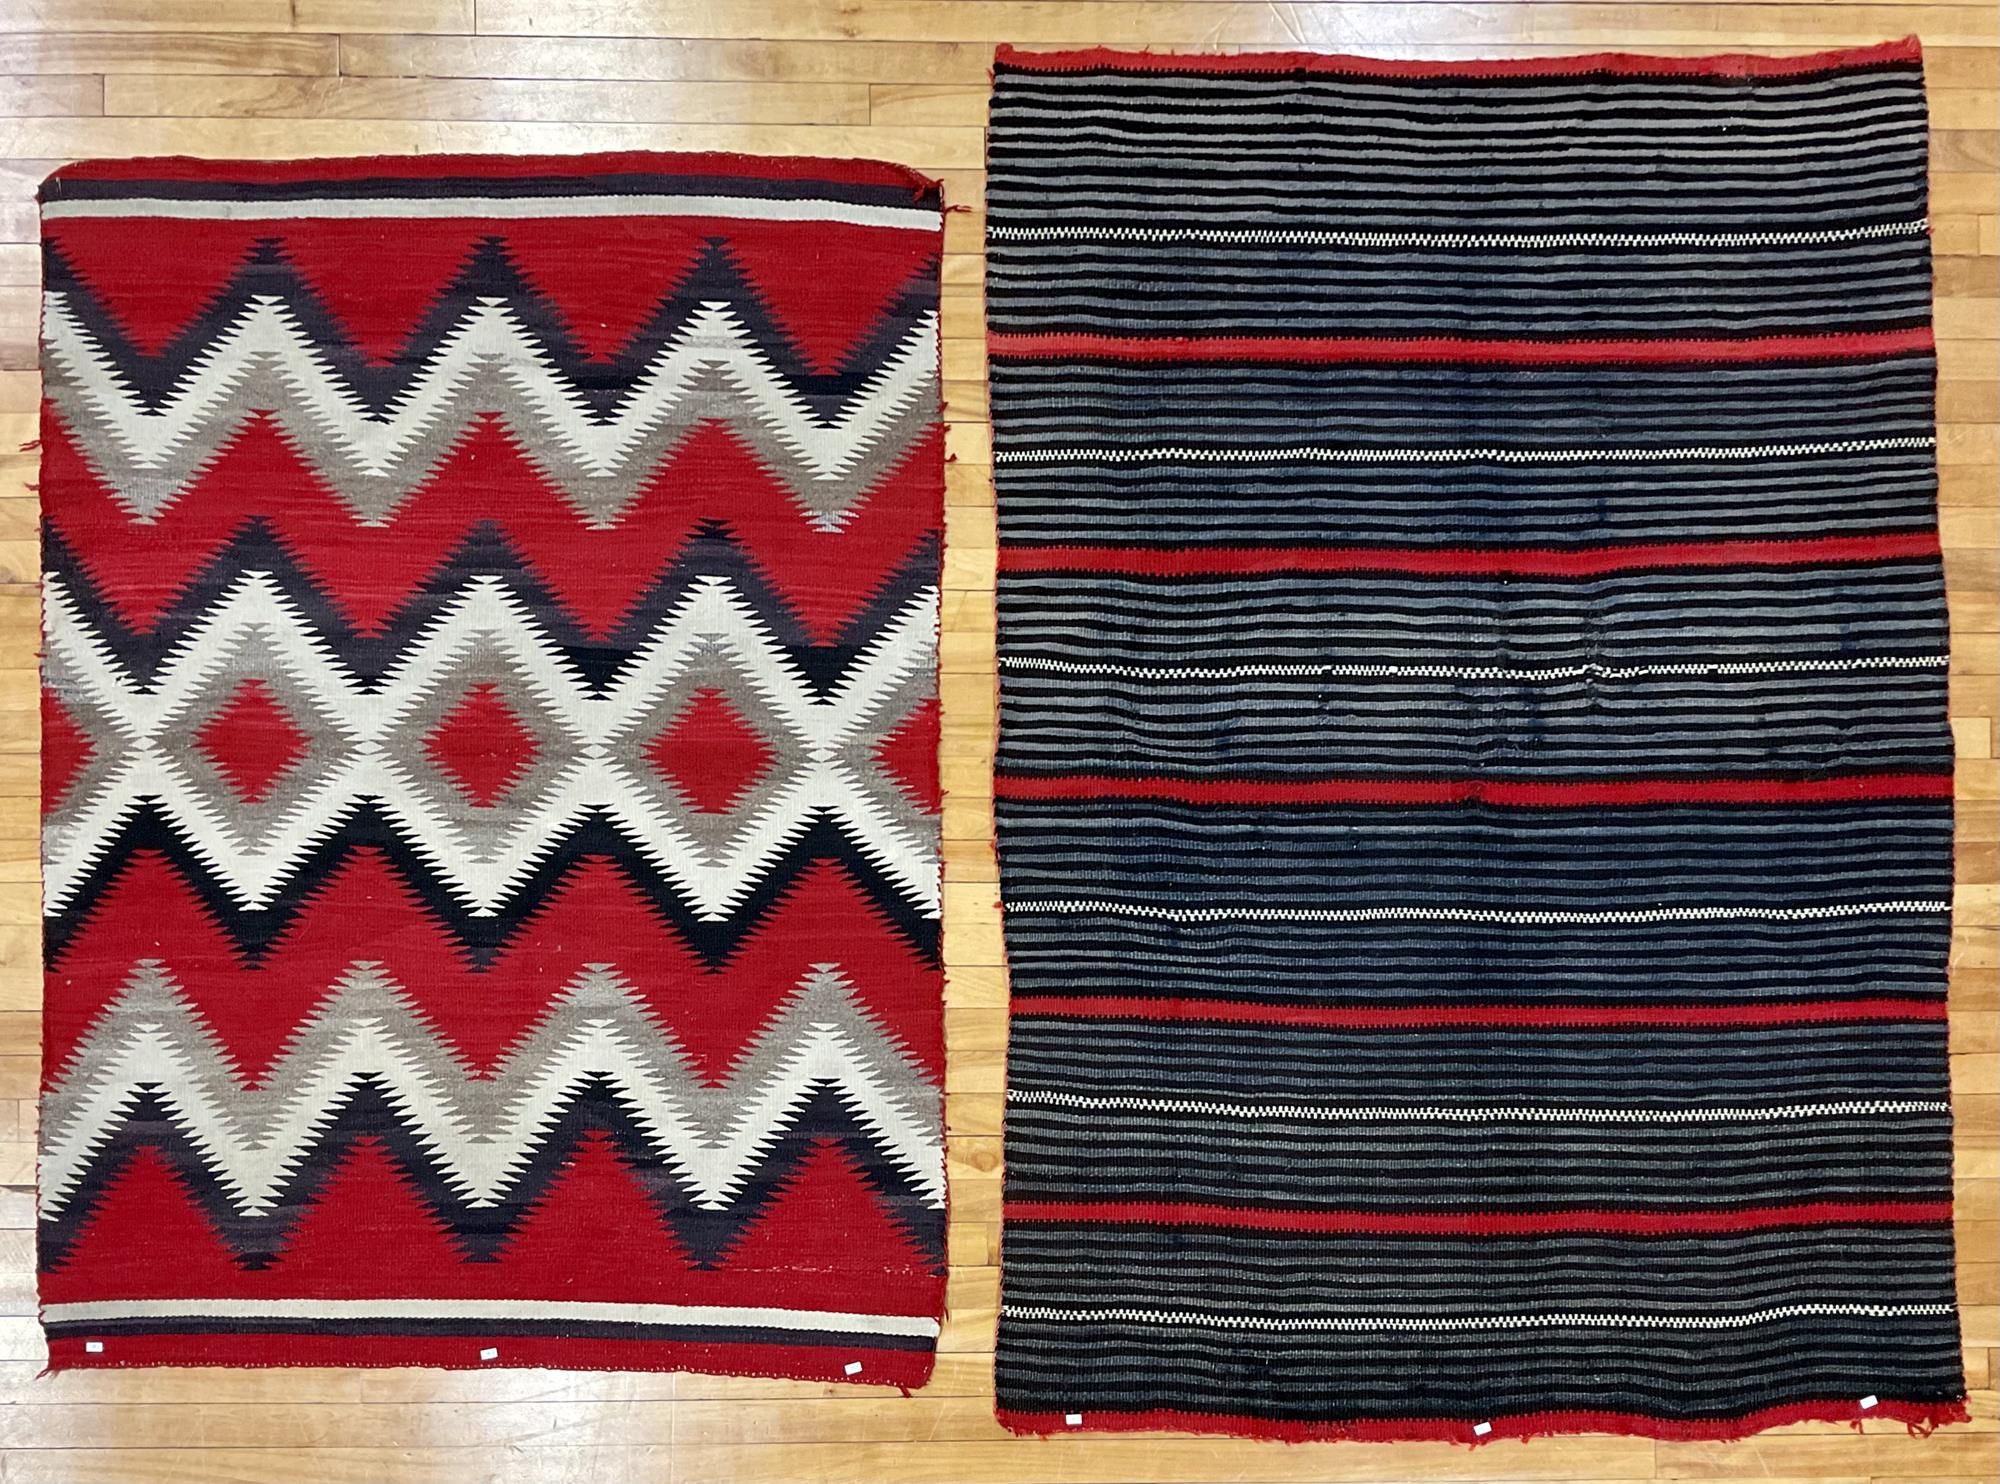 TWO COLORFUL NAVAJO RUGS. One red